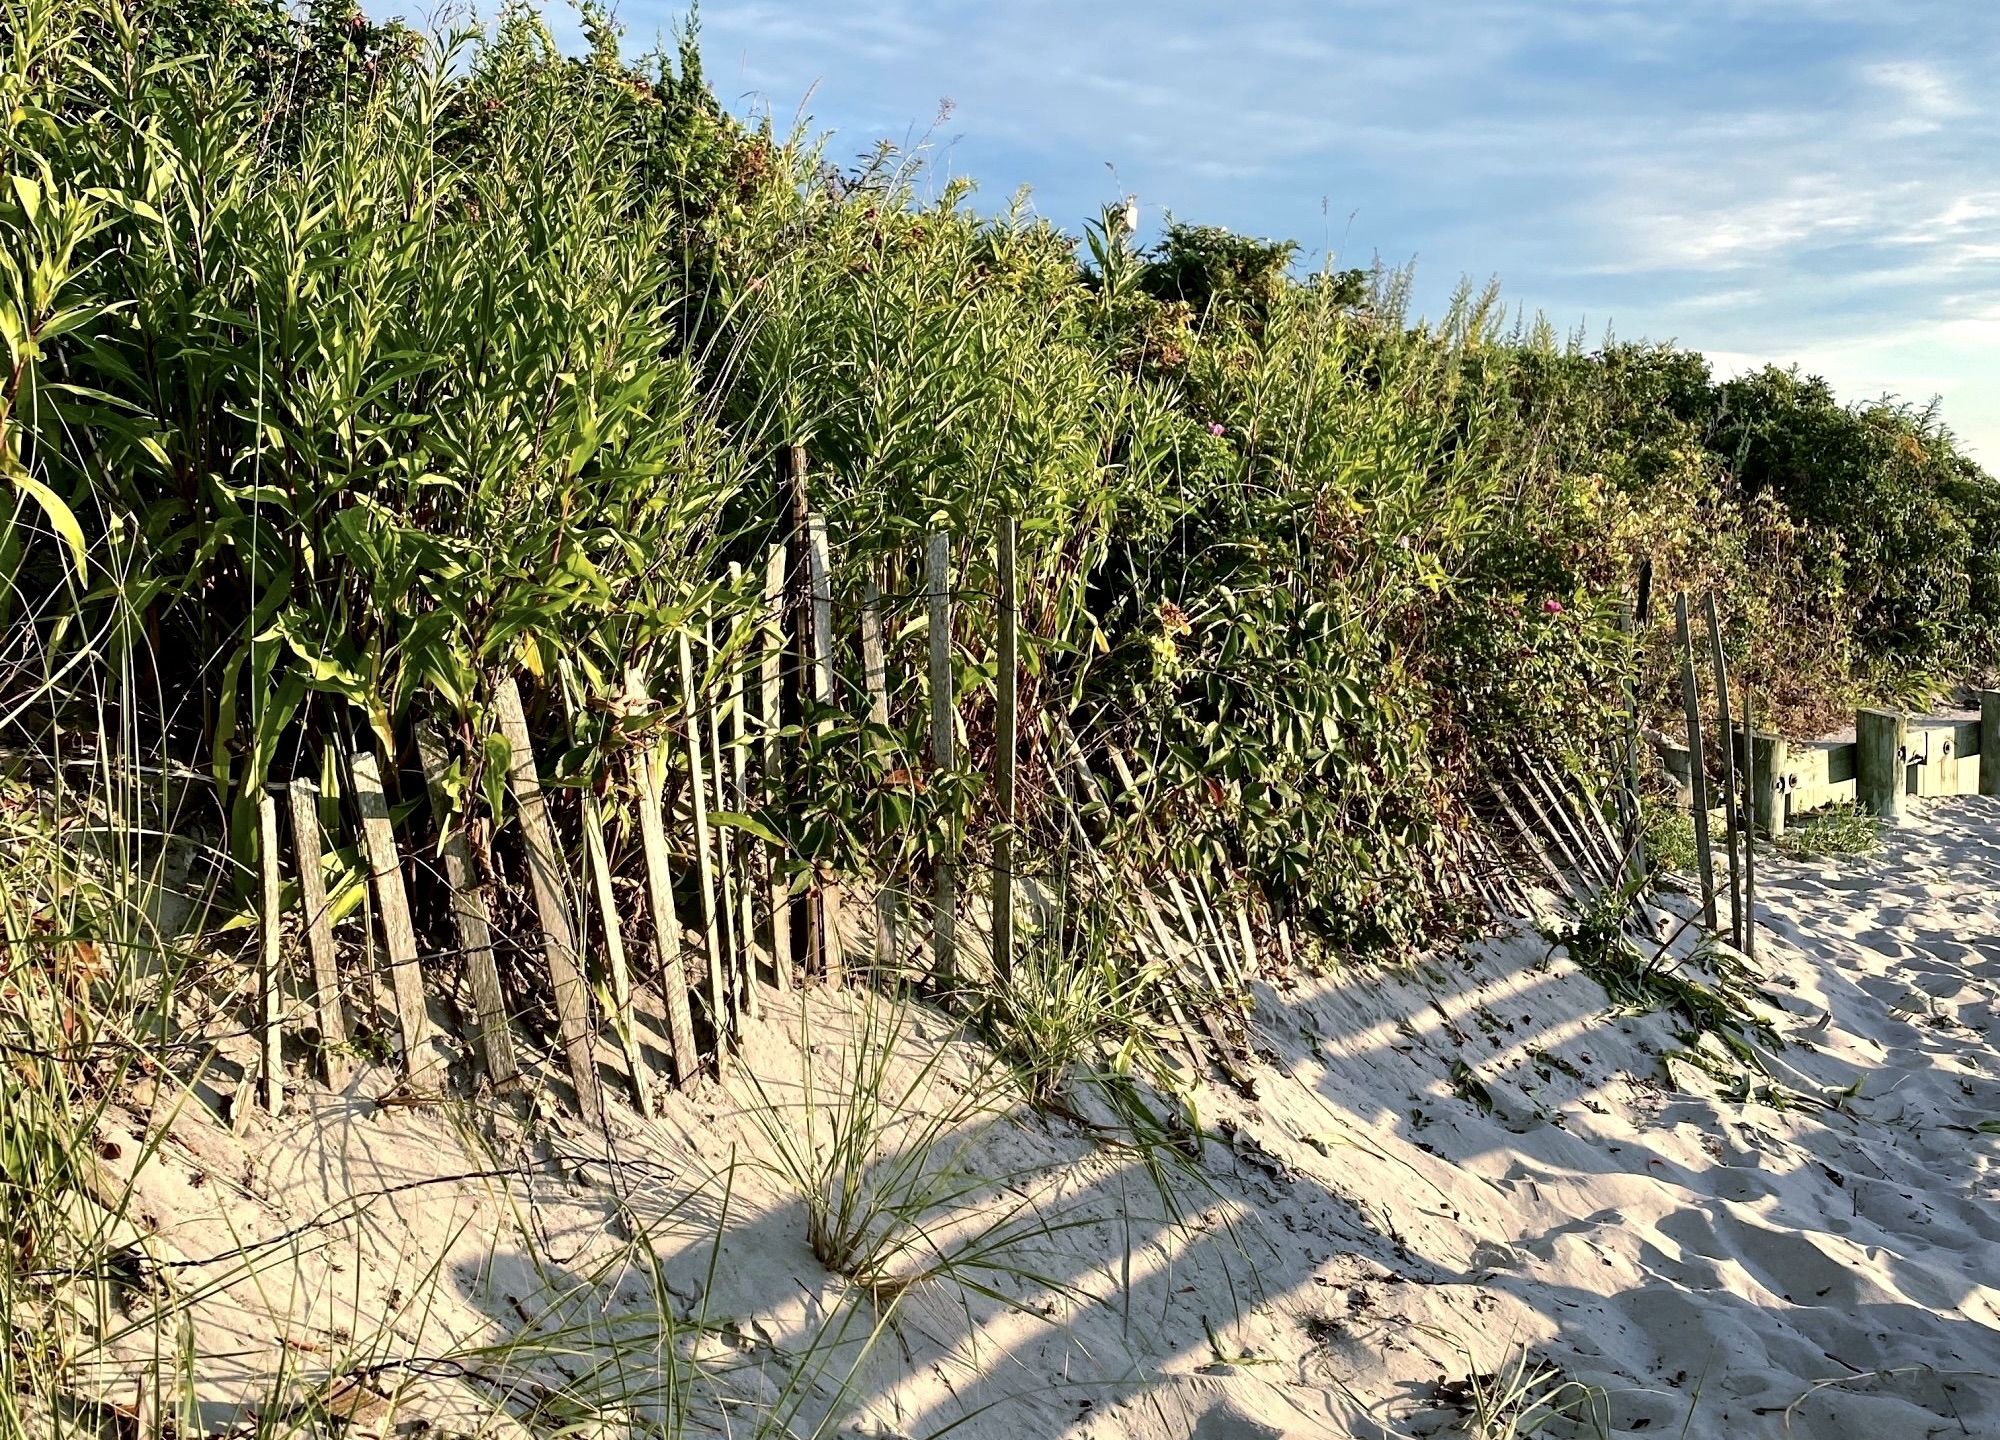 beach grasses behind a wooden fence